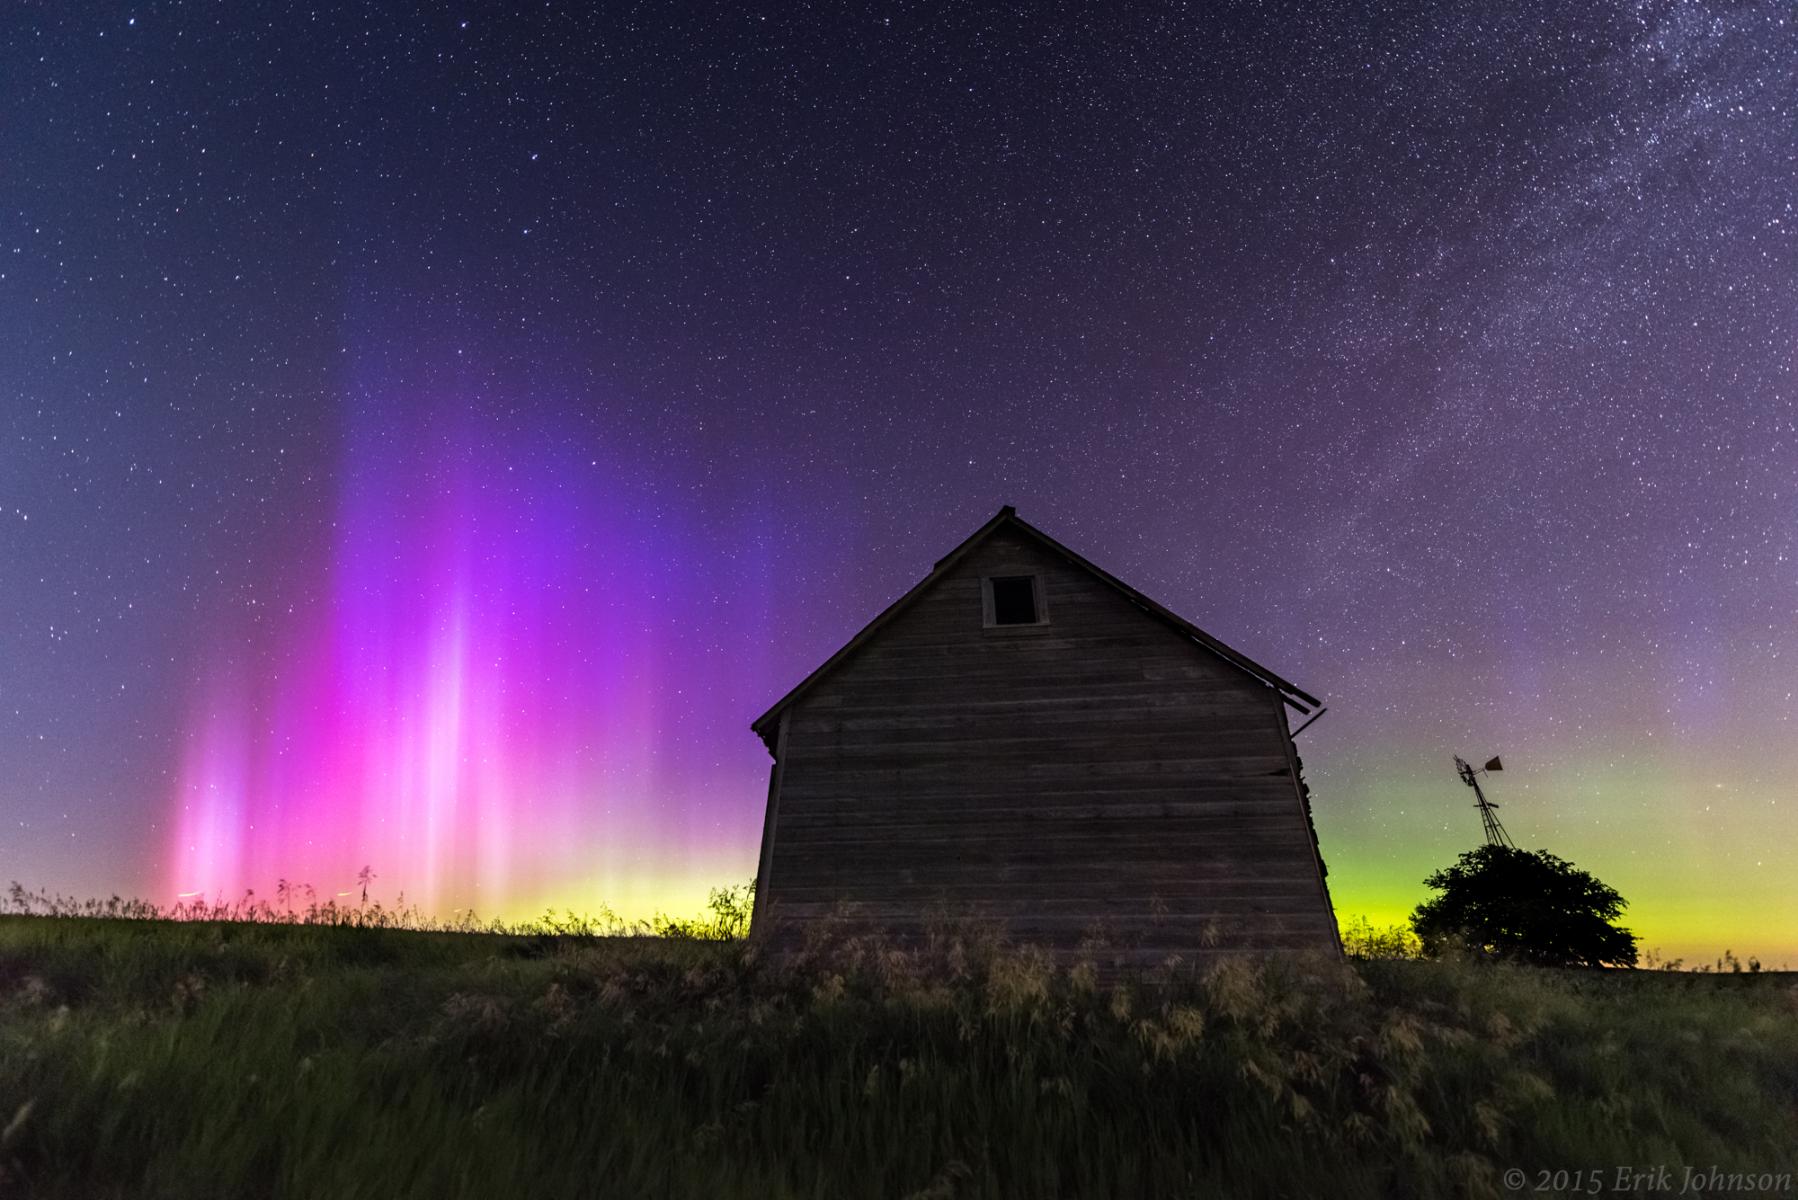 Aurora Borealis in the sky behind a wooden barn